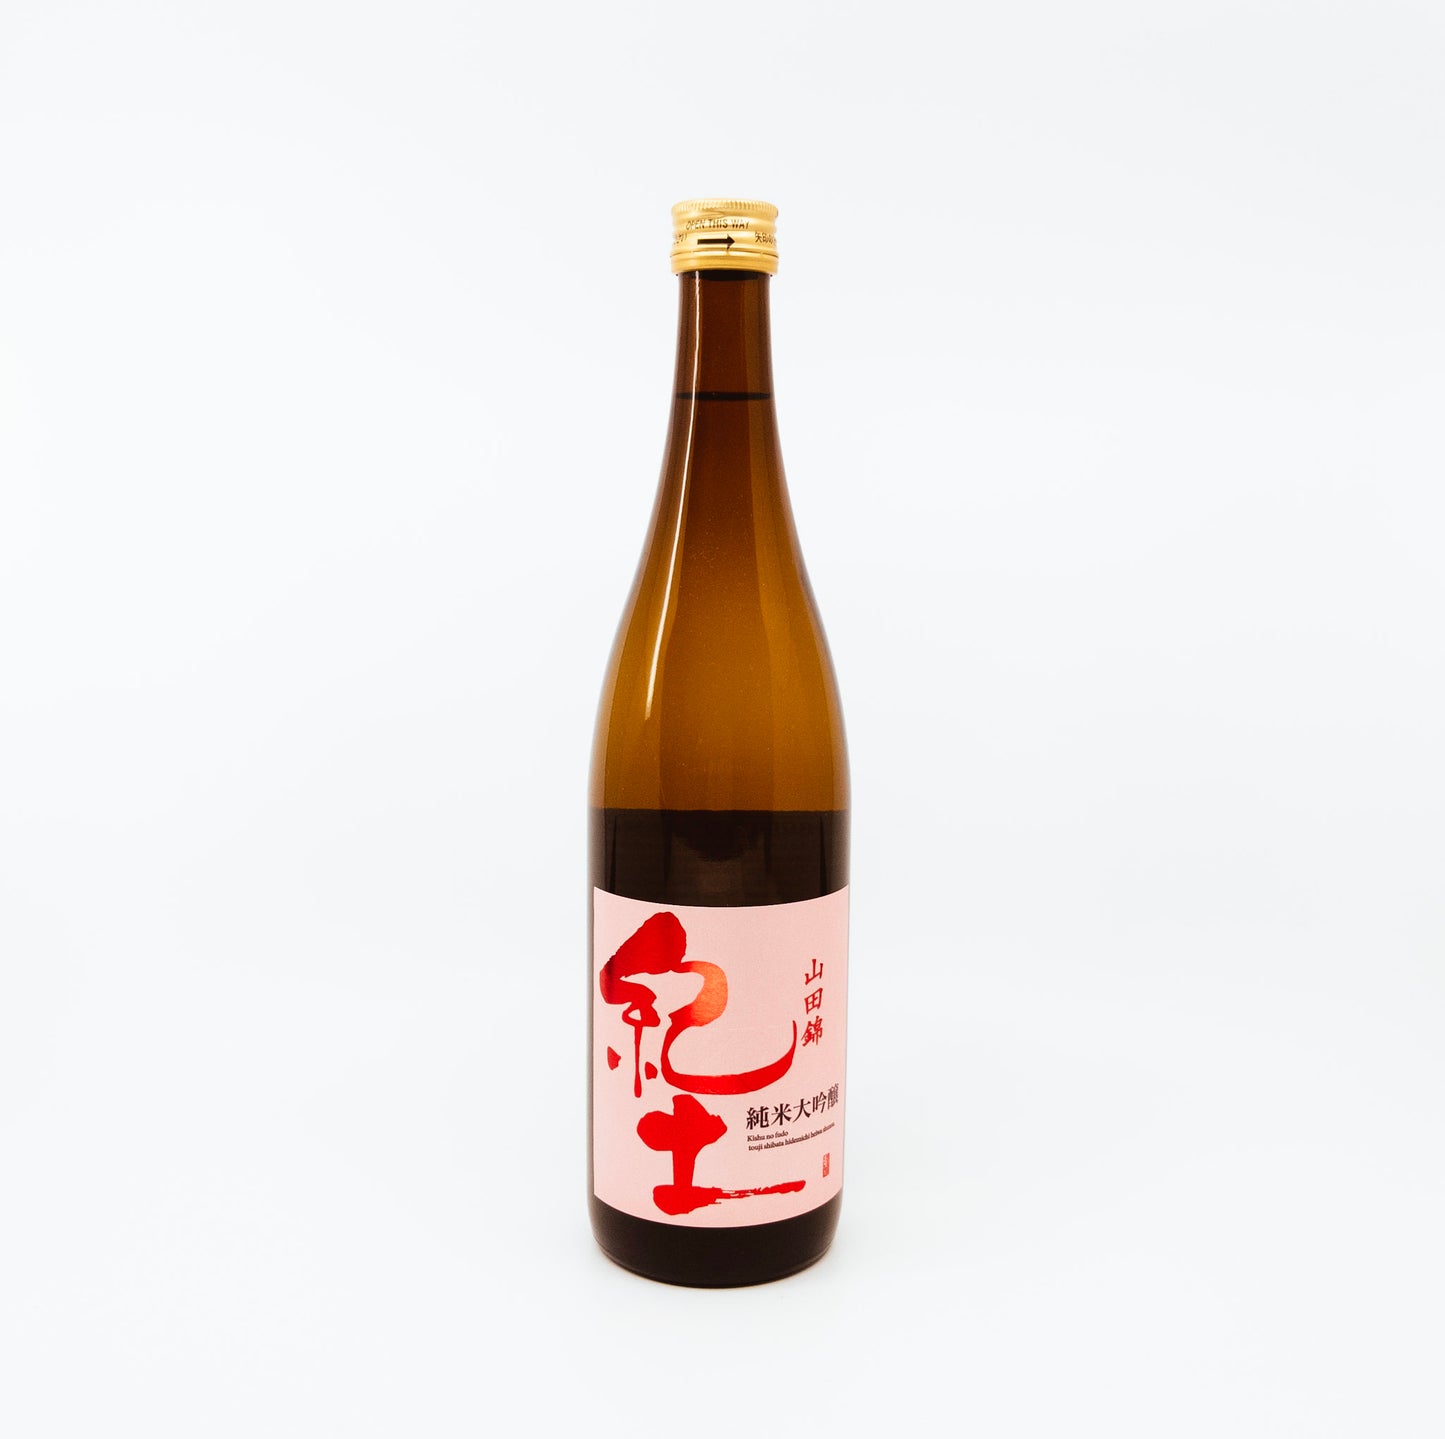 brown bottle with red writing on pink label